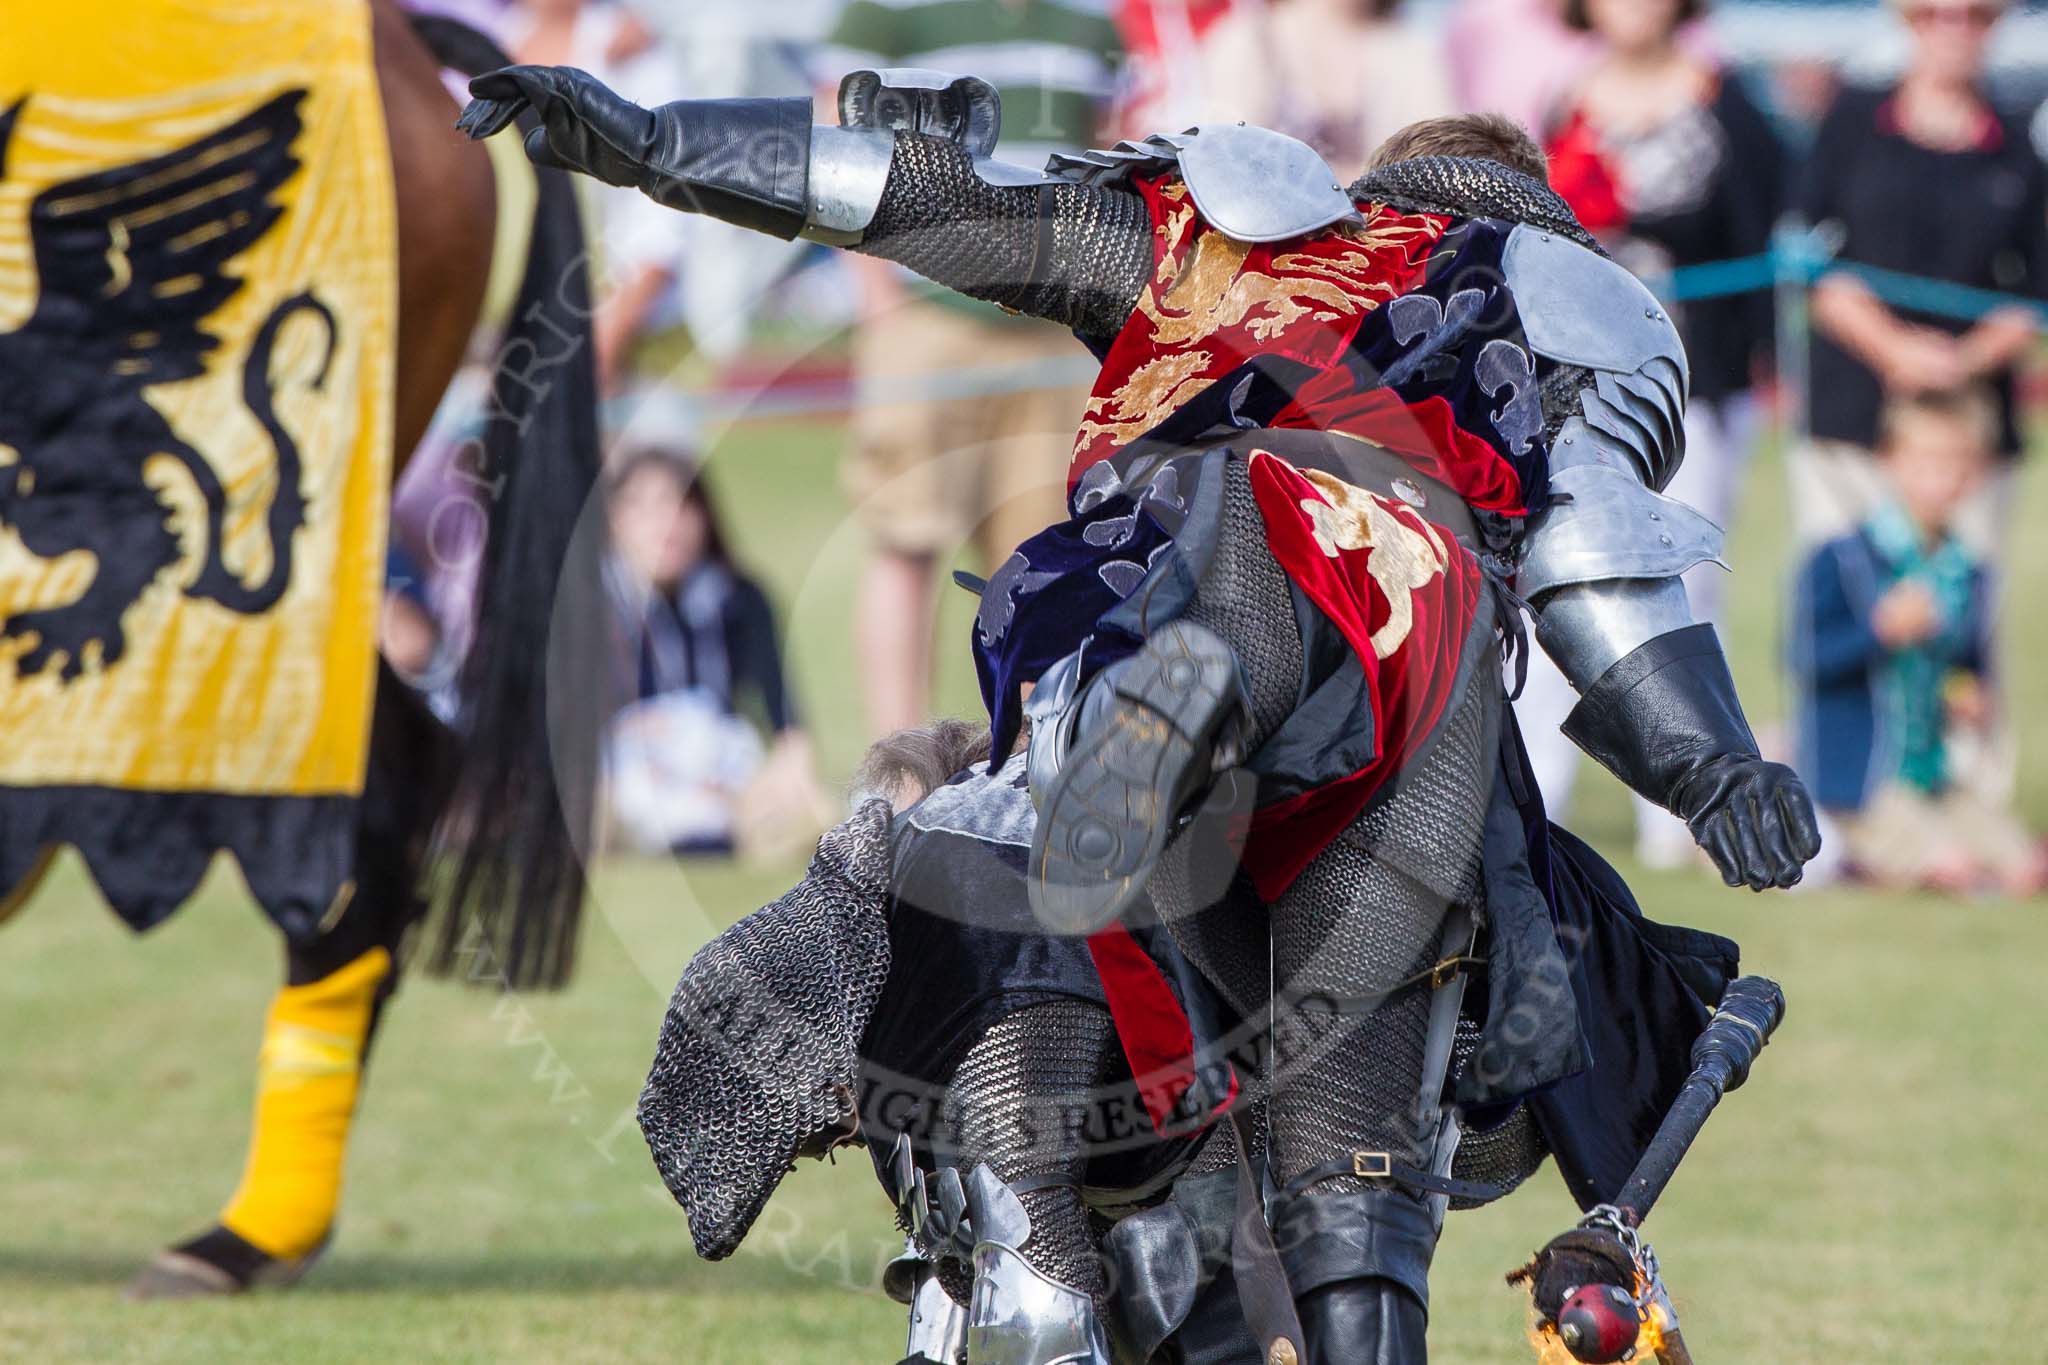 DBPC Polo in the Park 2013 - jousting display by the Knights of Middle England.
Dallas Burston Polo Club, ,
Southam,
Warwickshire,
United Kingdom,
on 01 September 2013 at 15:45, image #532